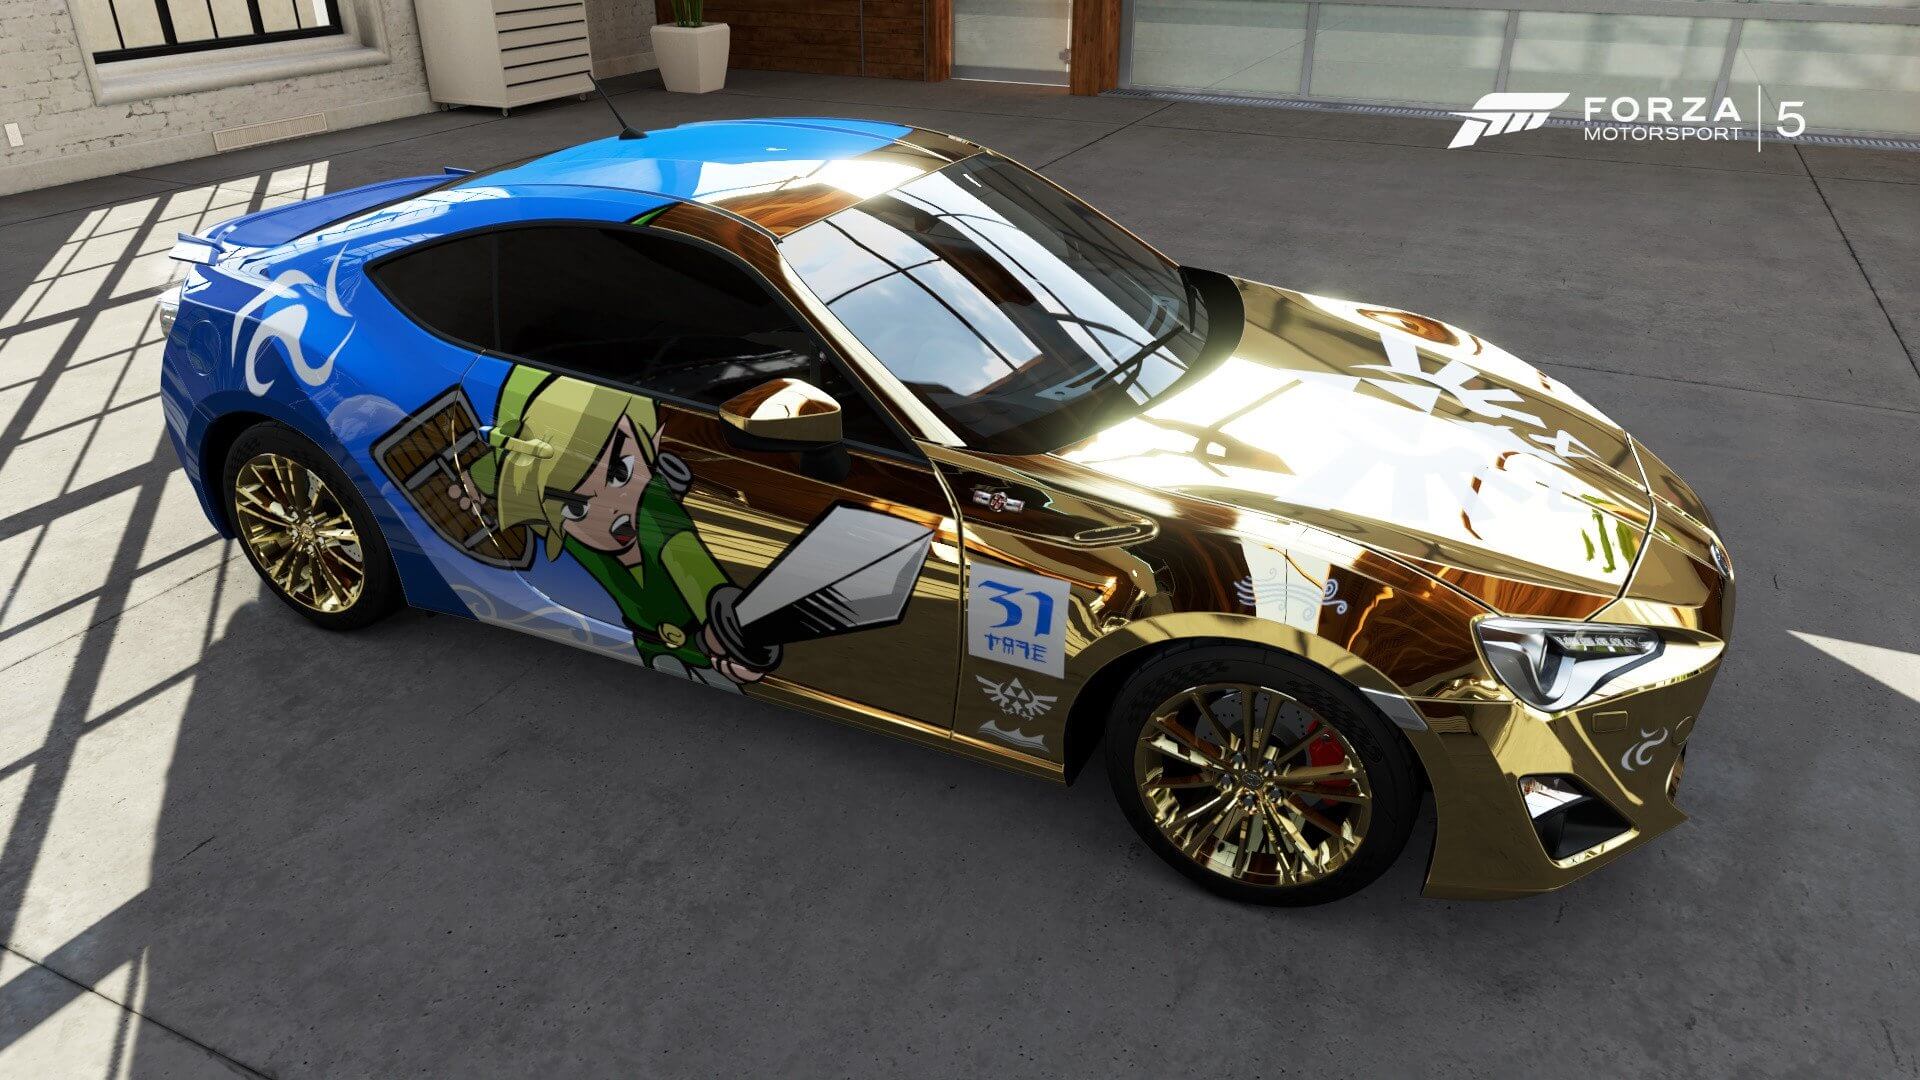 A gold and blue car with a cartoon character painted on it
